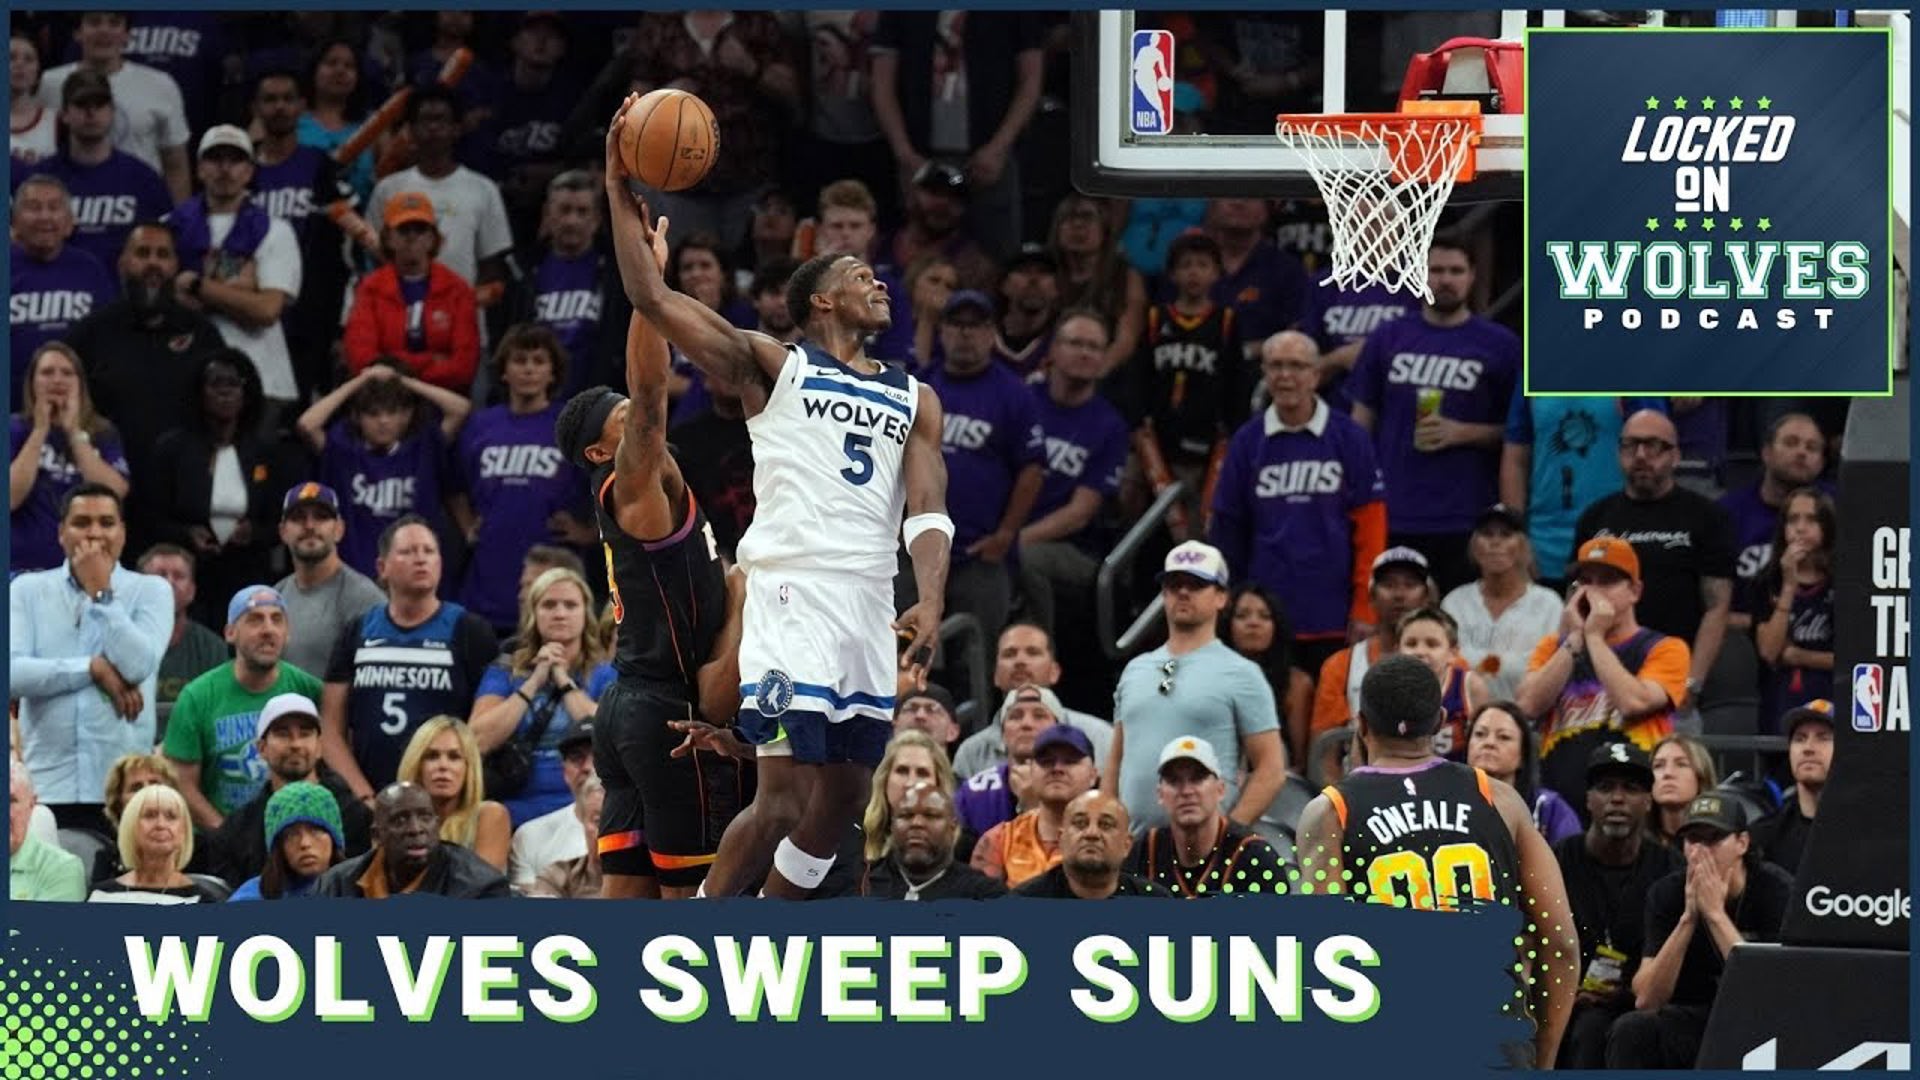 Anthony Edwards drops 40, Karl-Anthony Towns double-doubles as Minnesota Timberwolves sweep the Suns